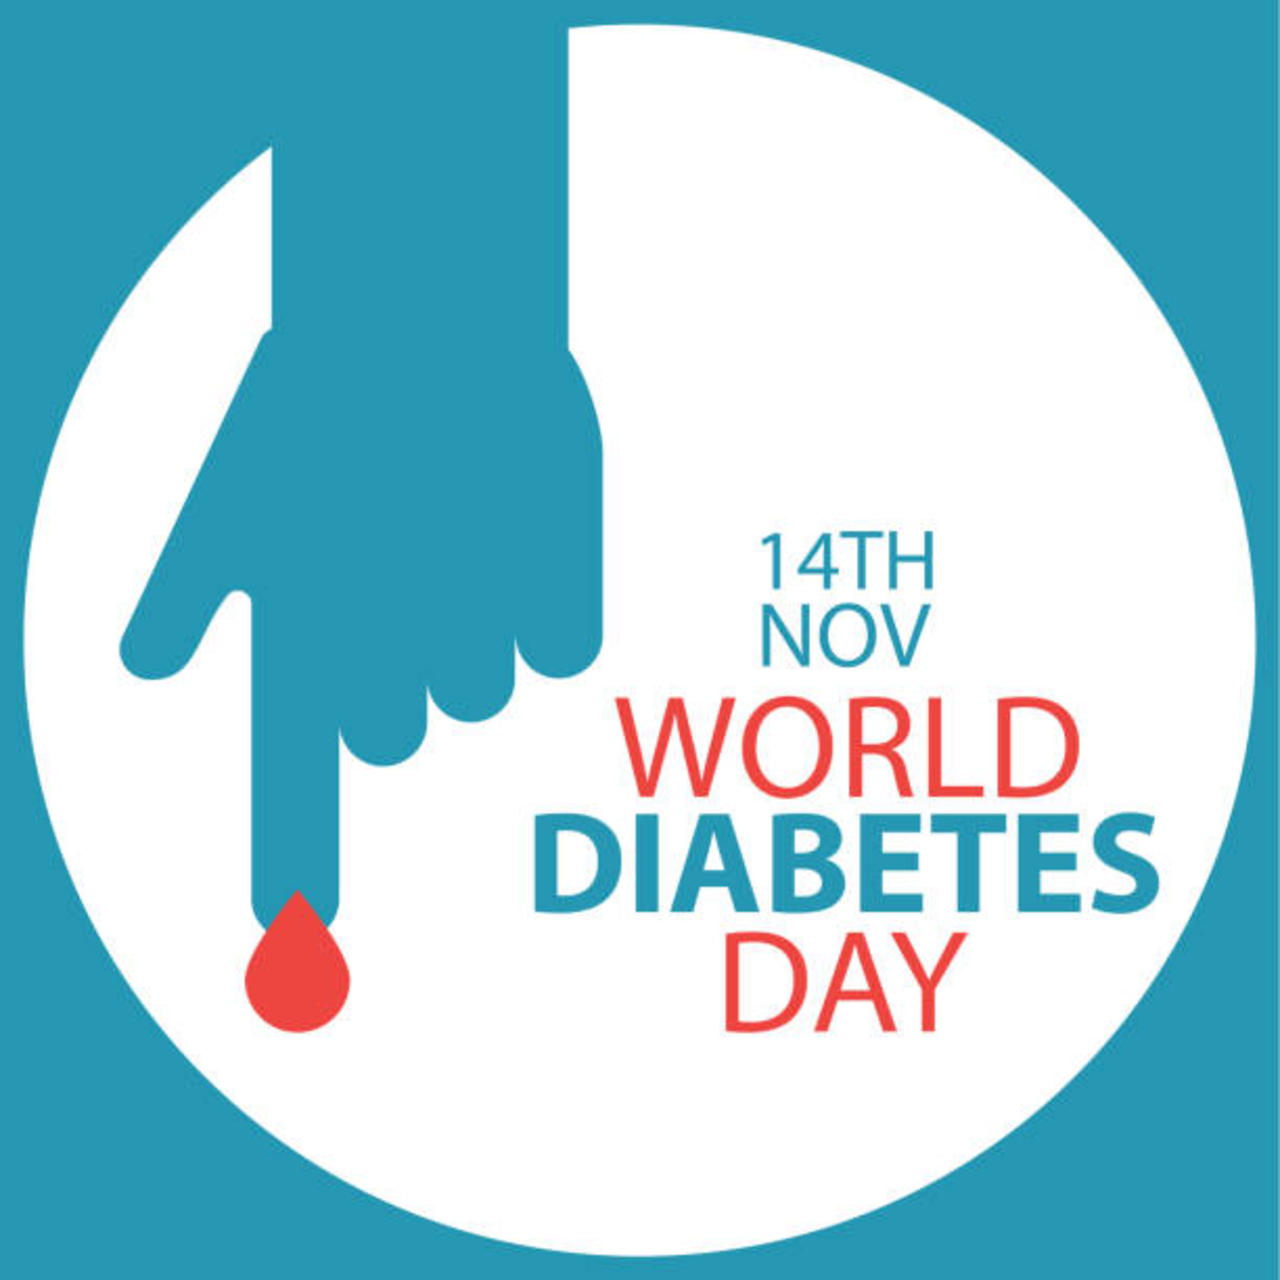 10 Ways to Reduce Your Risk of Diabetes (World Diabetes Day)